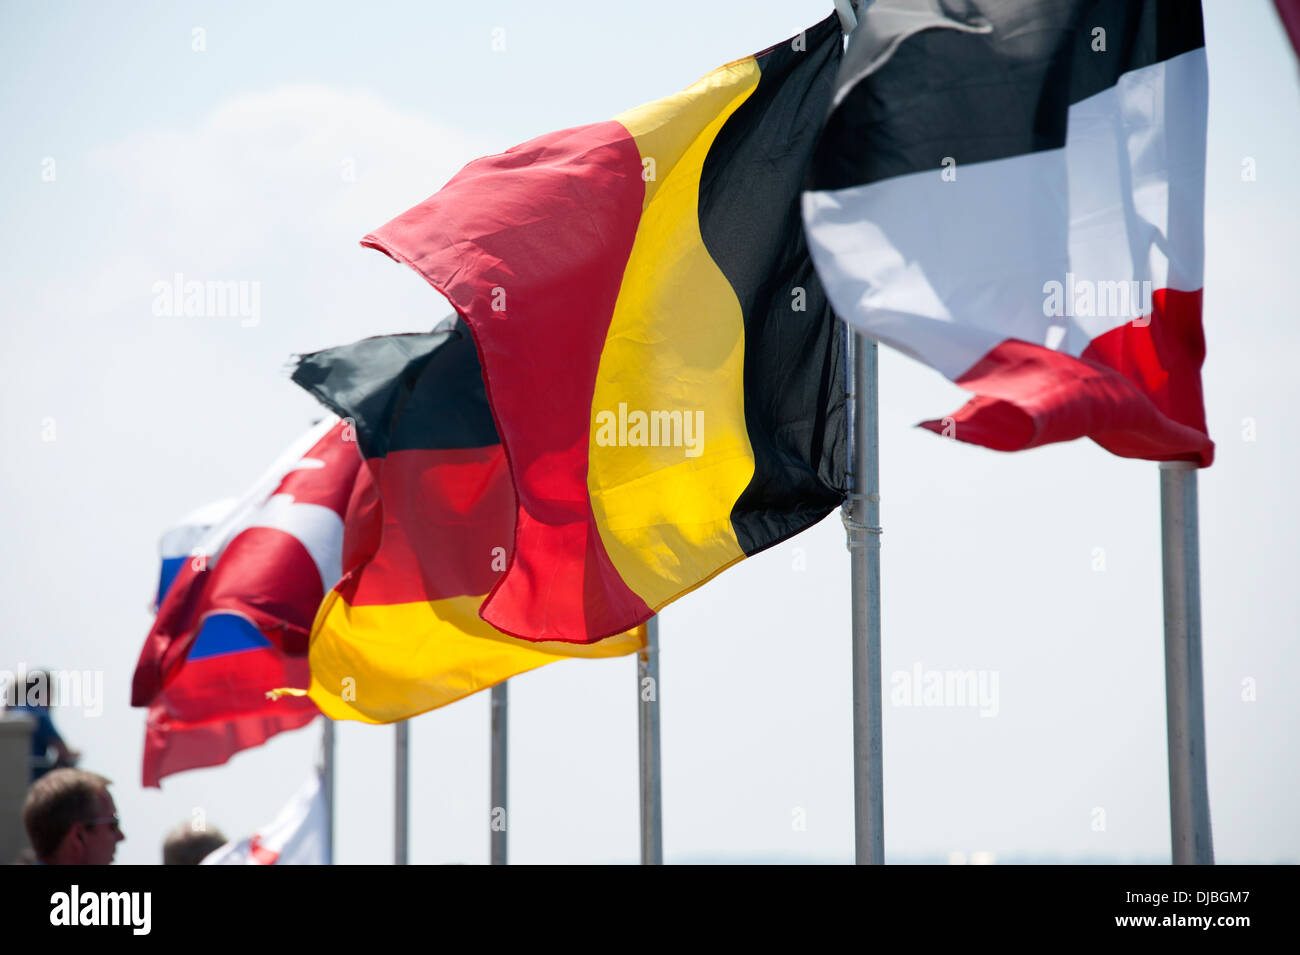 Flags of the Nations Countries Flags Blowing in Wind Stock Photo